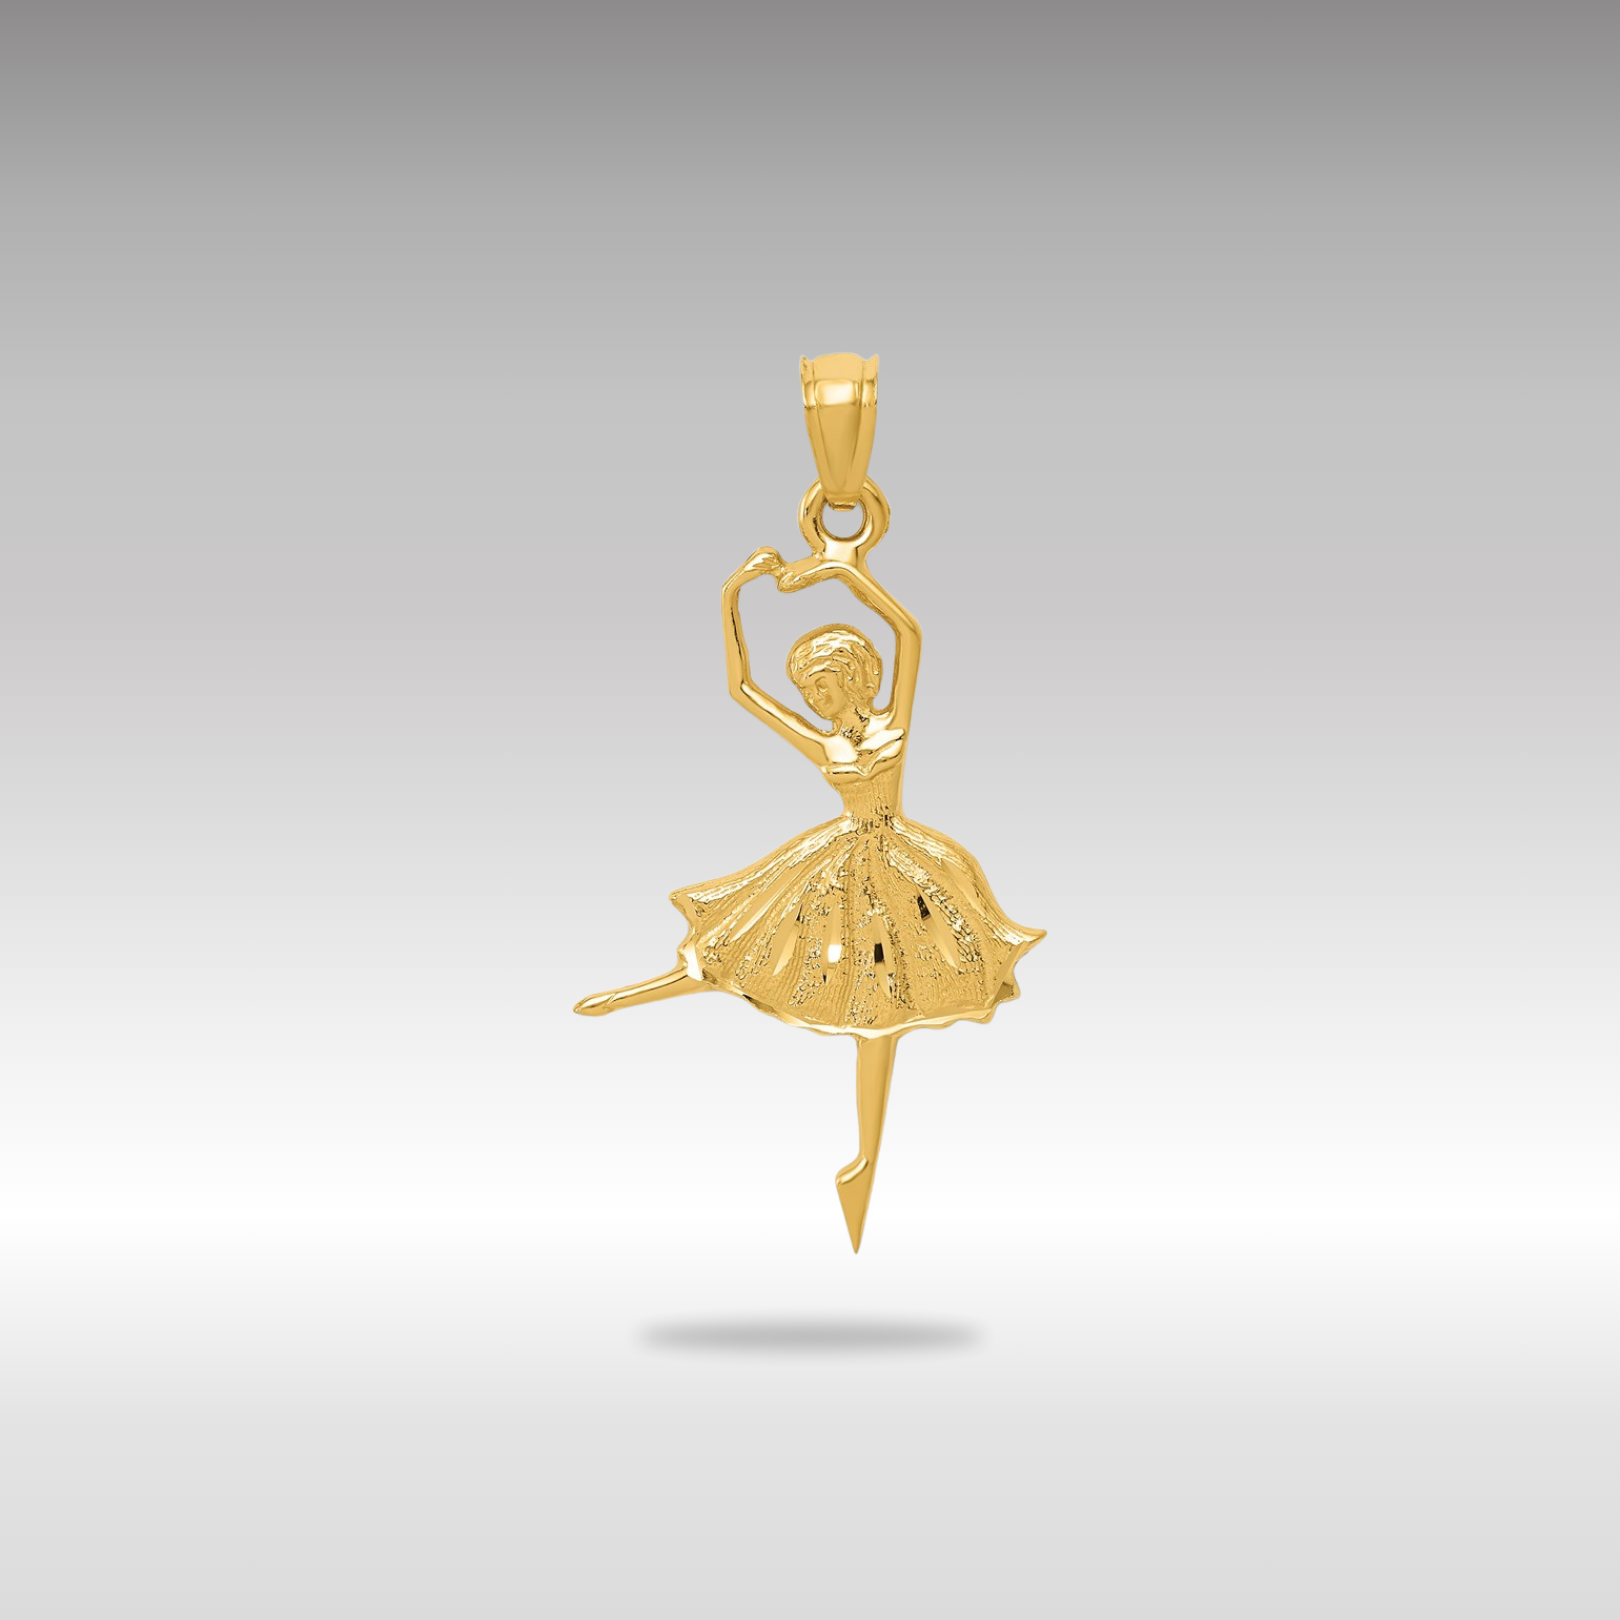 Gold Dancing Ballerina Necklace Pendant - Charlie & Co. Jewelry